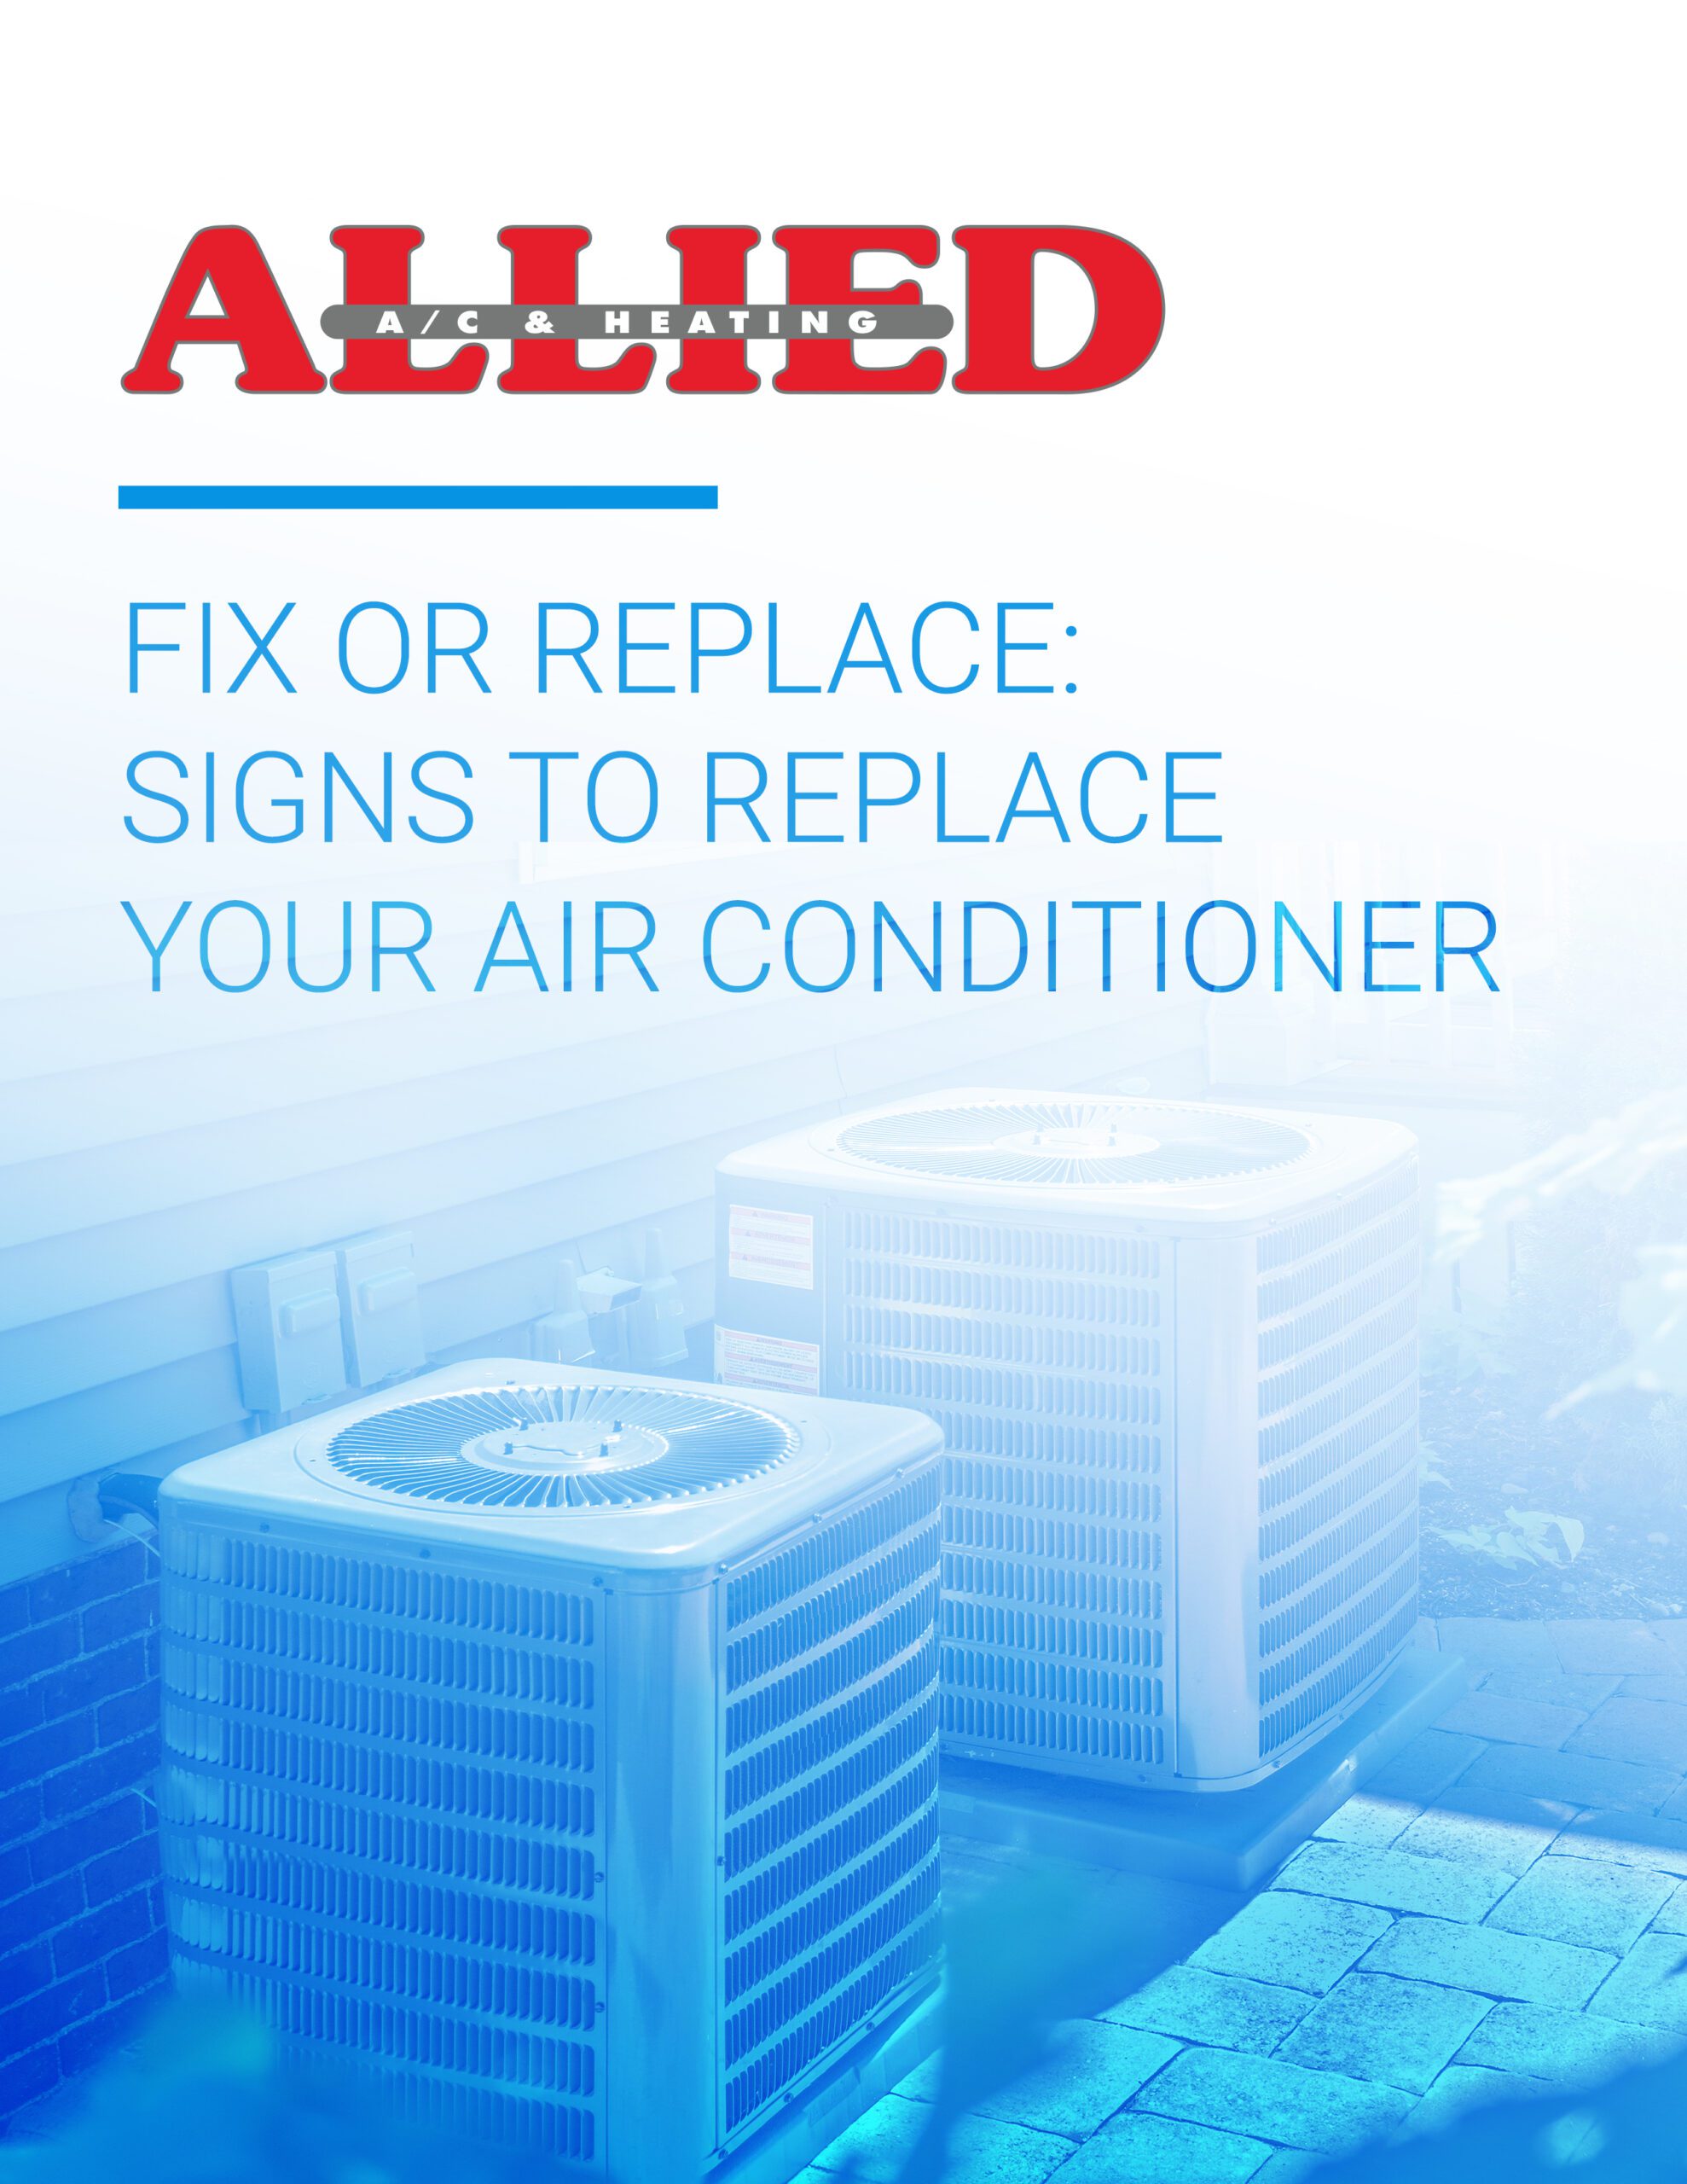 FIX OR REPLACE: SIGNS TO REPLACE YOUR AIR CONDITIONER